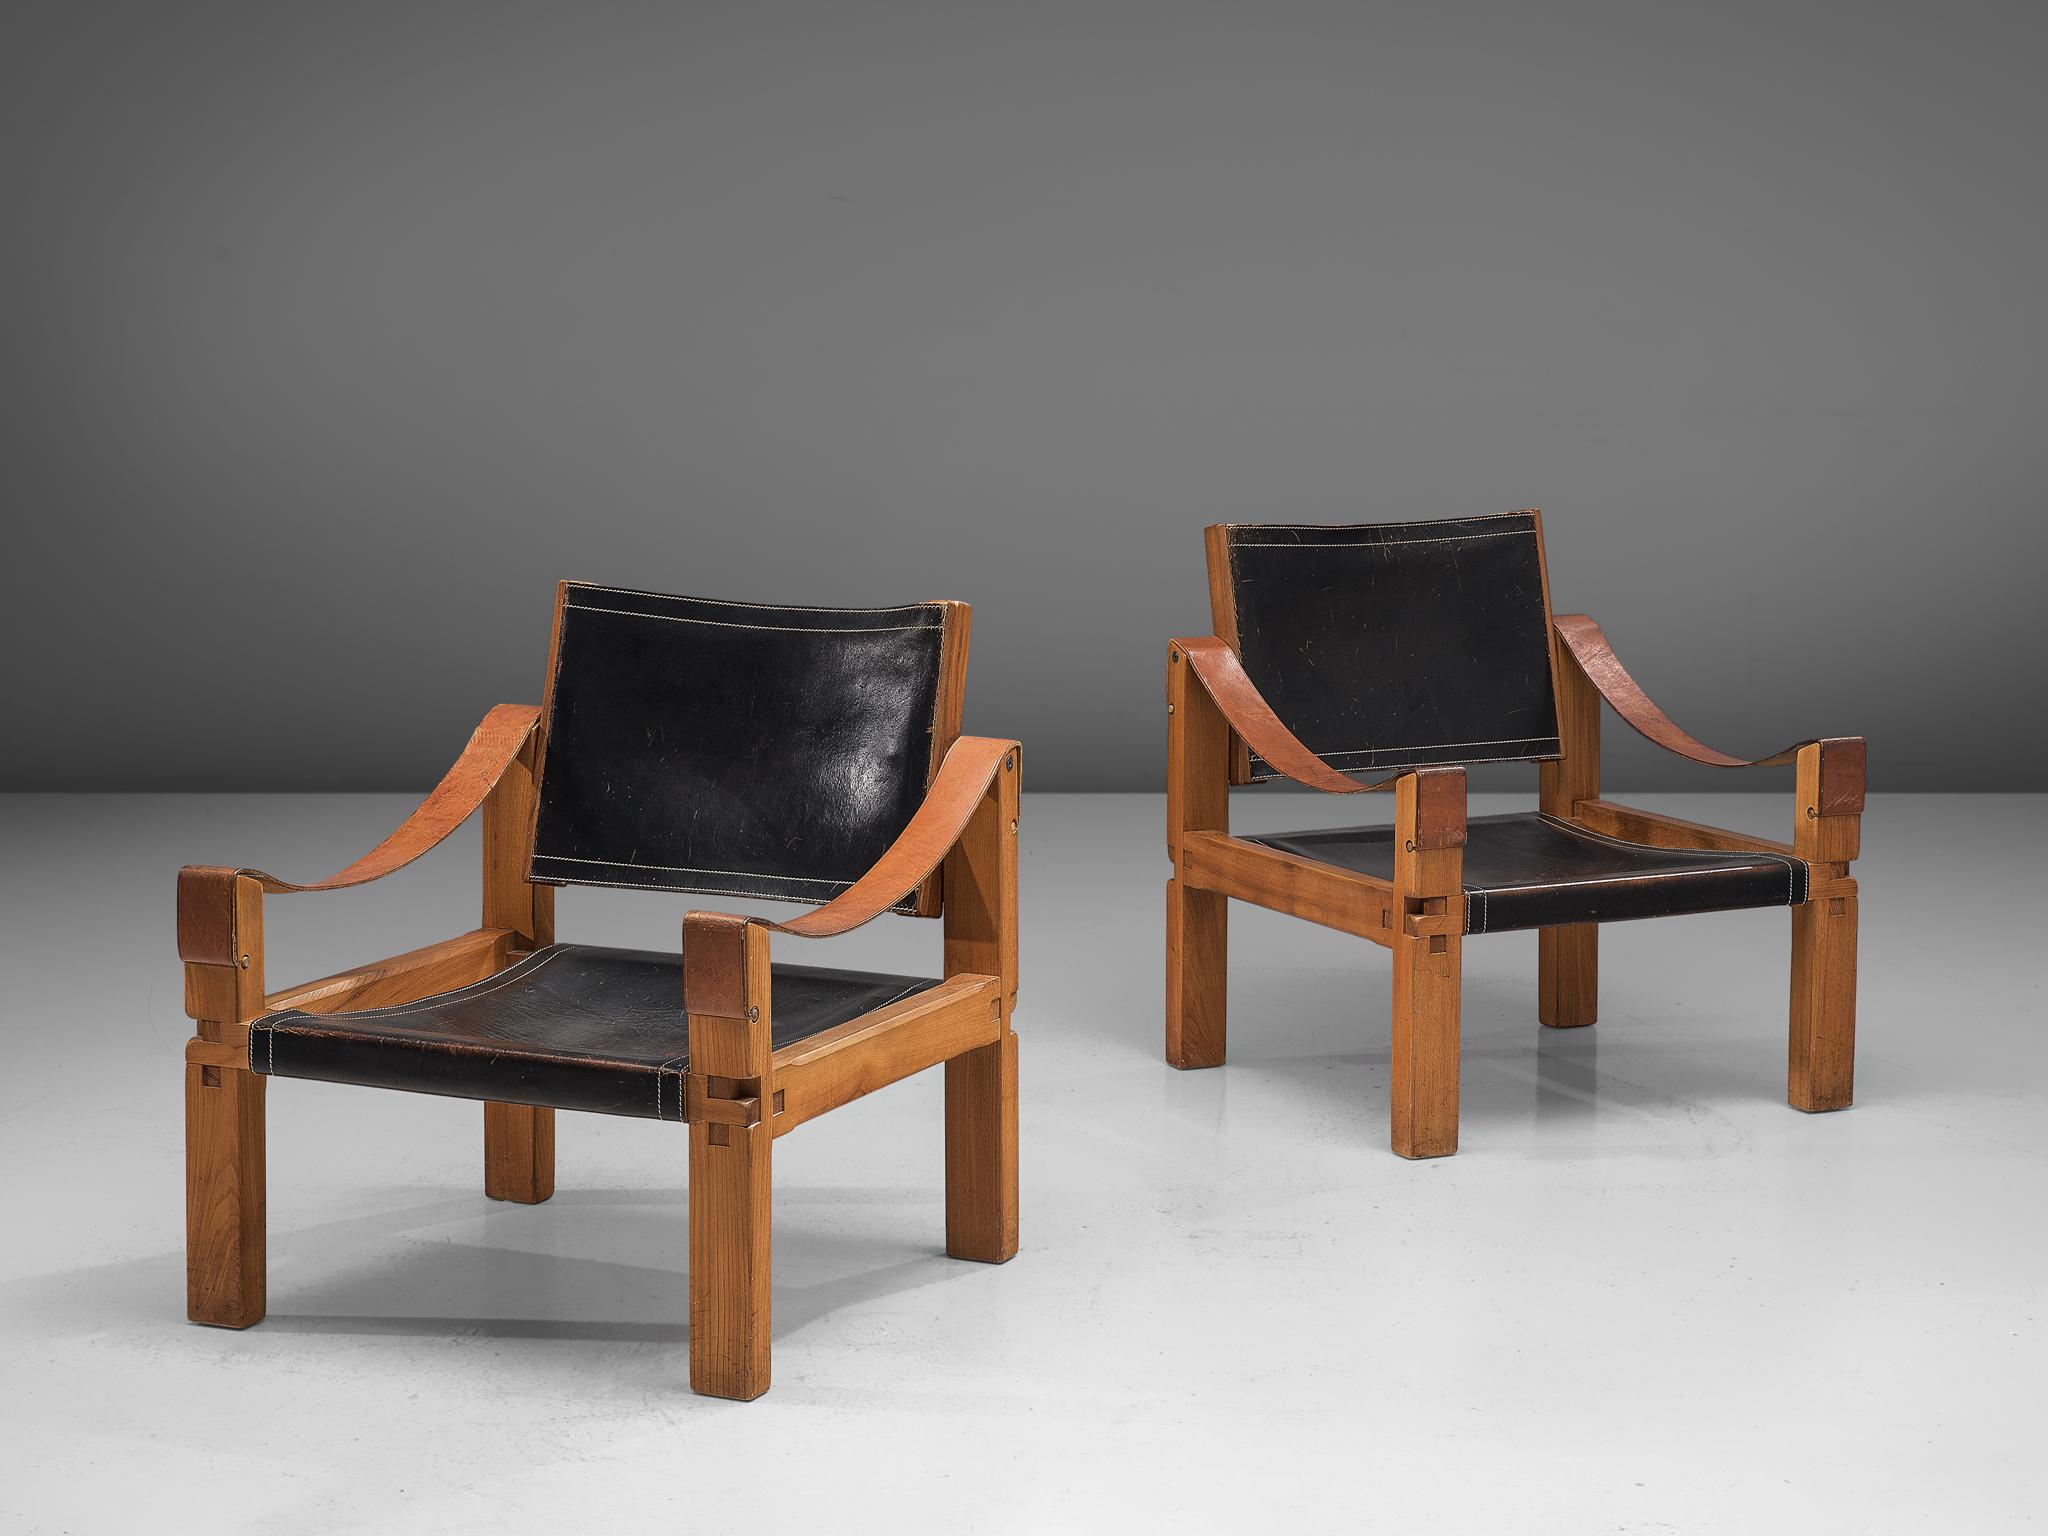 Pierre Chapo, two armchairs, model S10X, elm and leather, France, circa 1964.

This set of two lounge chairs is designed by Pierre Chapo. These comfortable armchairs in solid elmwood and black saddle leather of this specific set features a